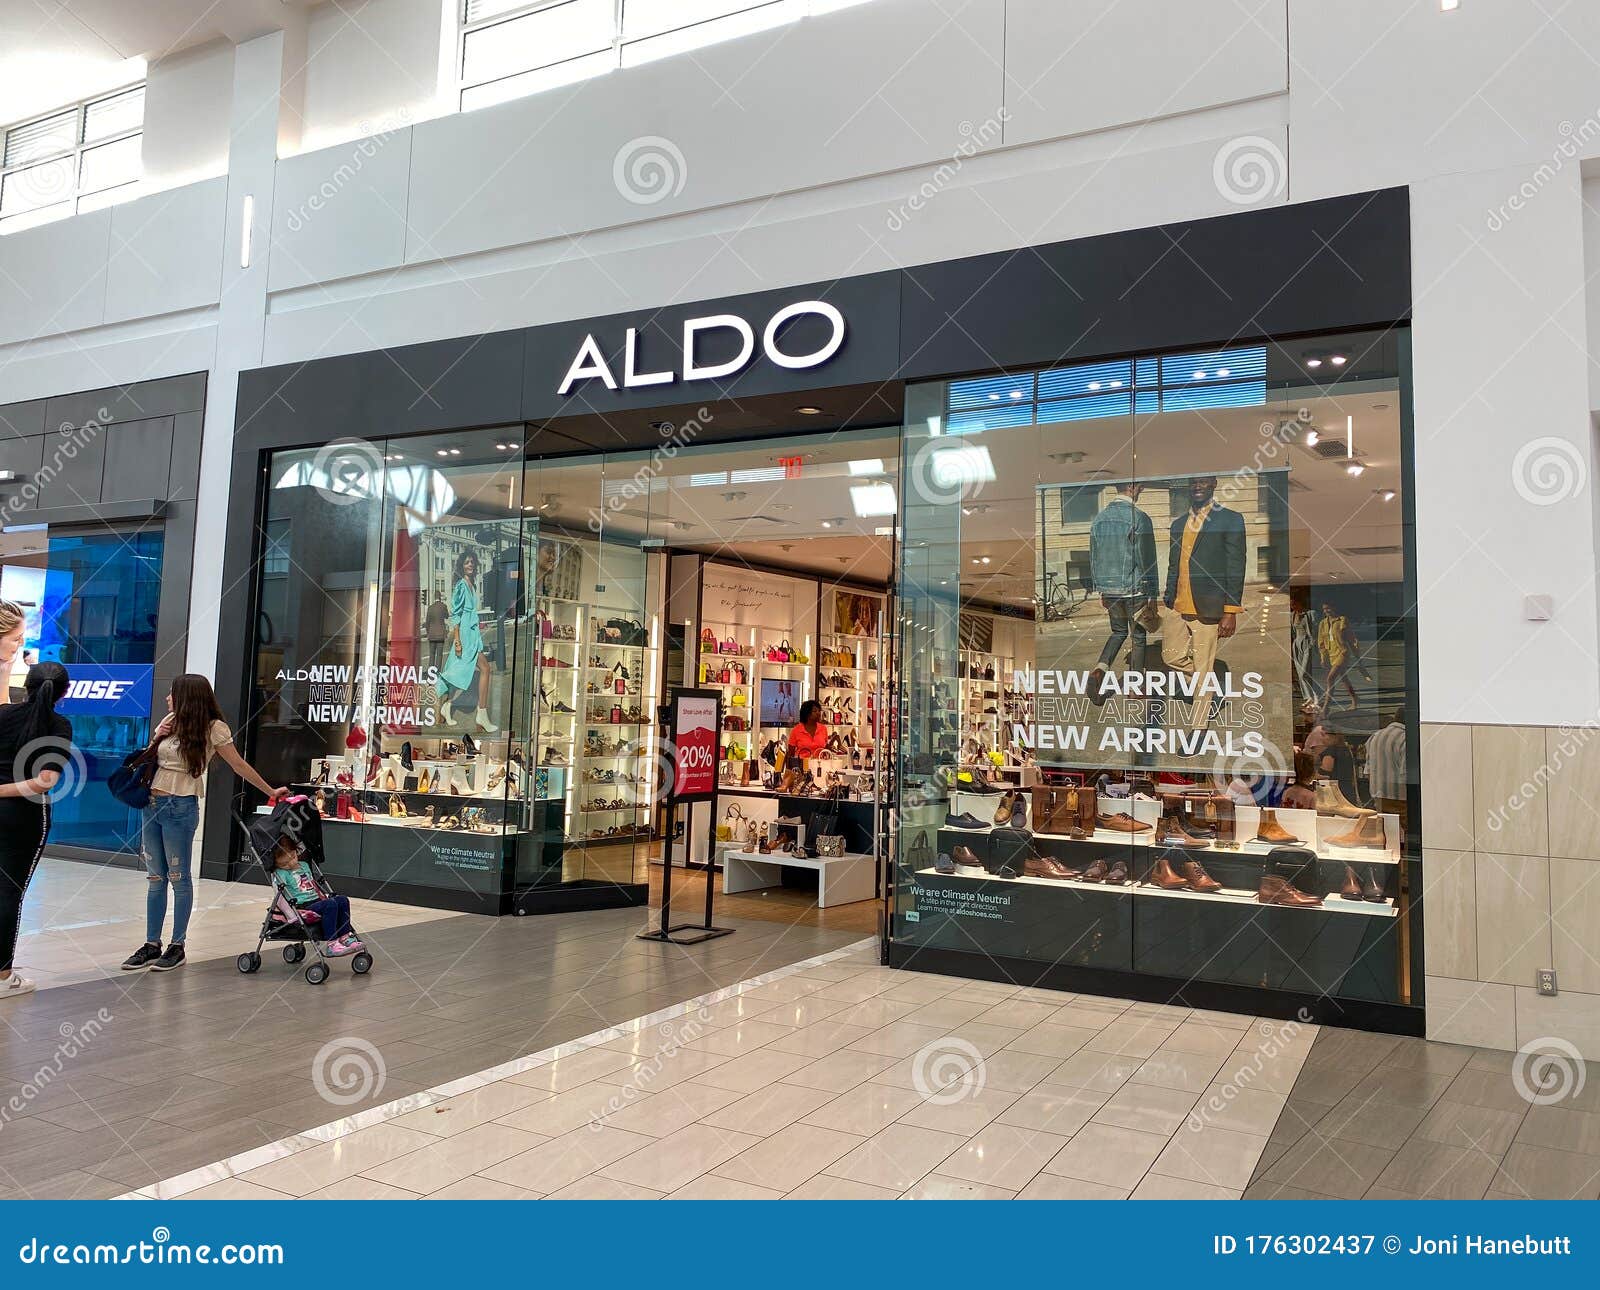 pensum Langt væk kandidatgrad An Aldo Retail Fashion Shoes and Accessories Store in an Indoor Mall in  Orlando, FL Editorial Photography - Image of display, purse: 176302437